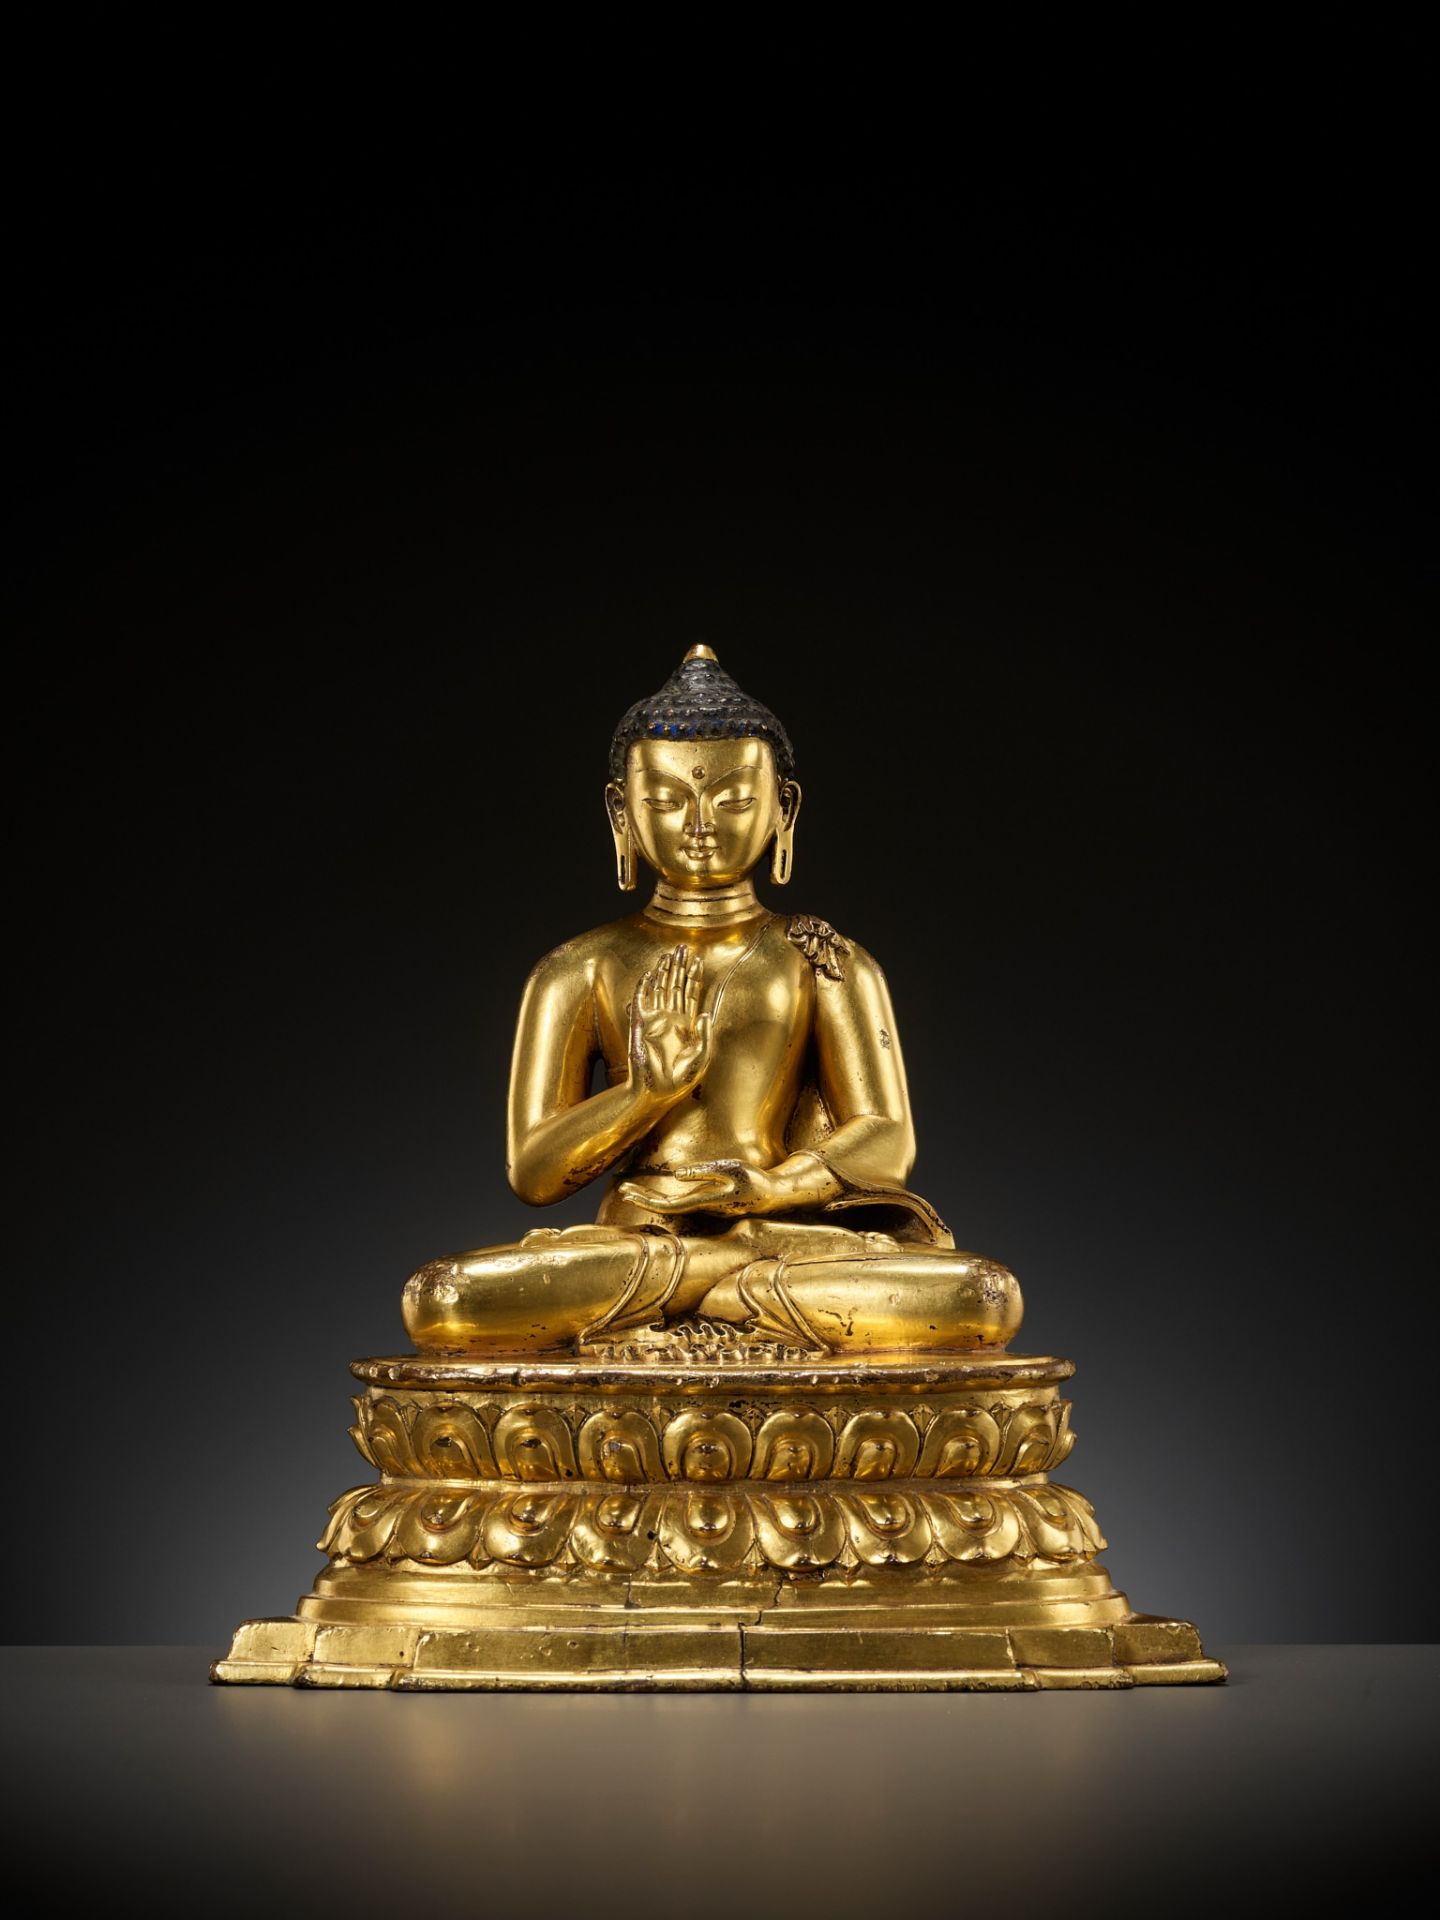 A GILT COPPER ALLOY FIGURE OF AMOGHASIDDHI, POSSIBLY DENSATIL, TIBET, 14TH-15TH CENTURY - Image 2 of 22